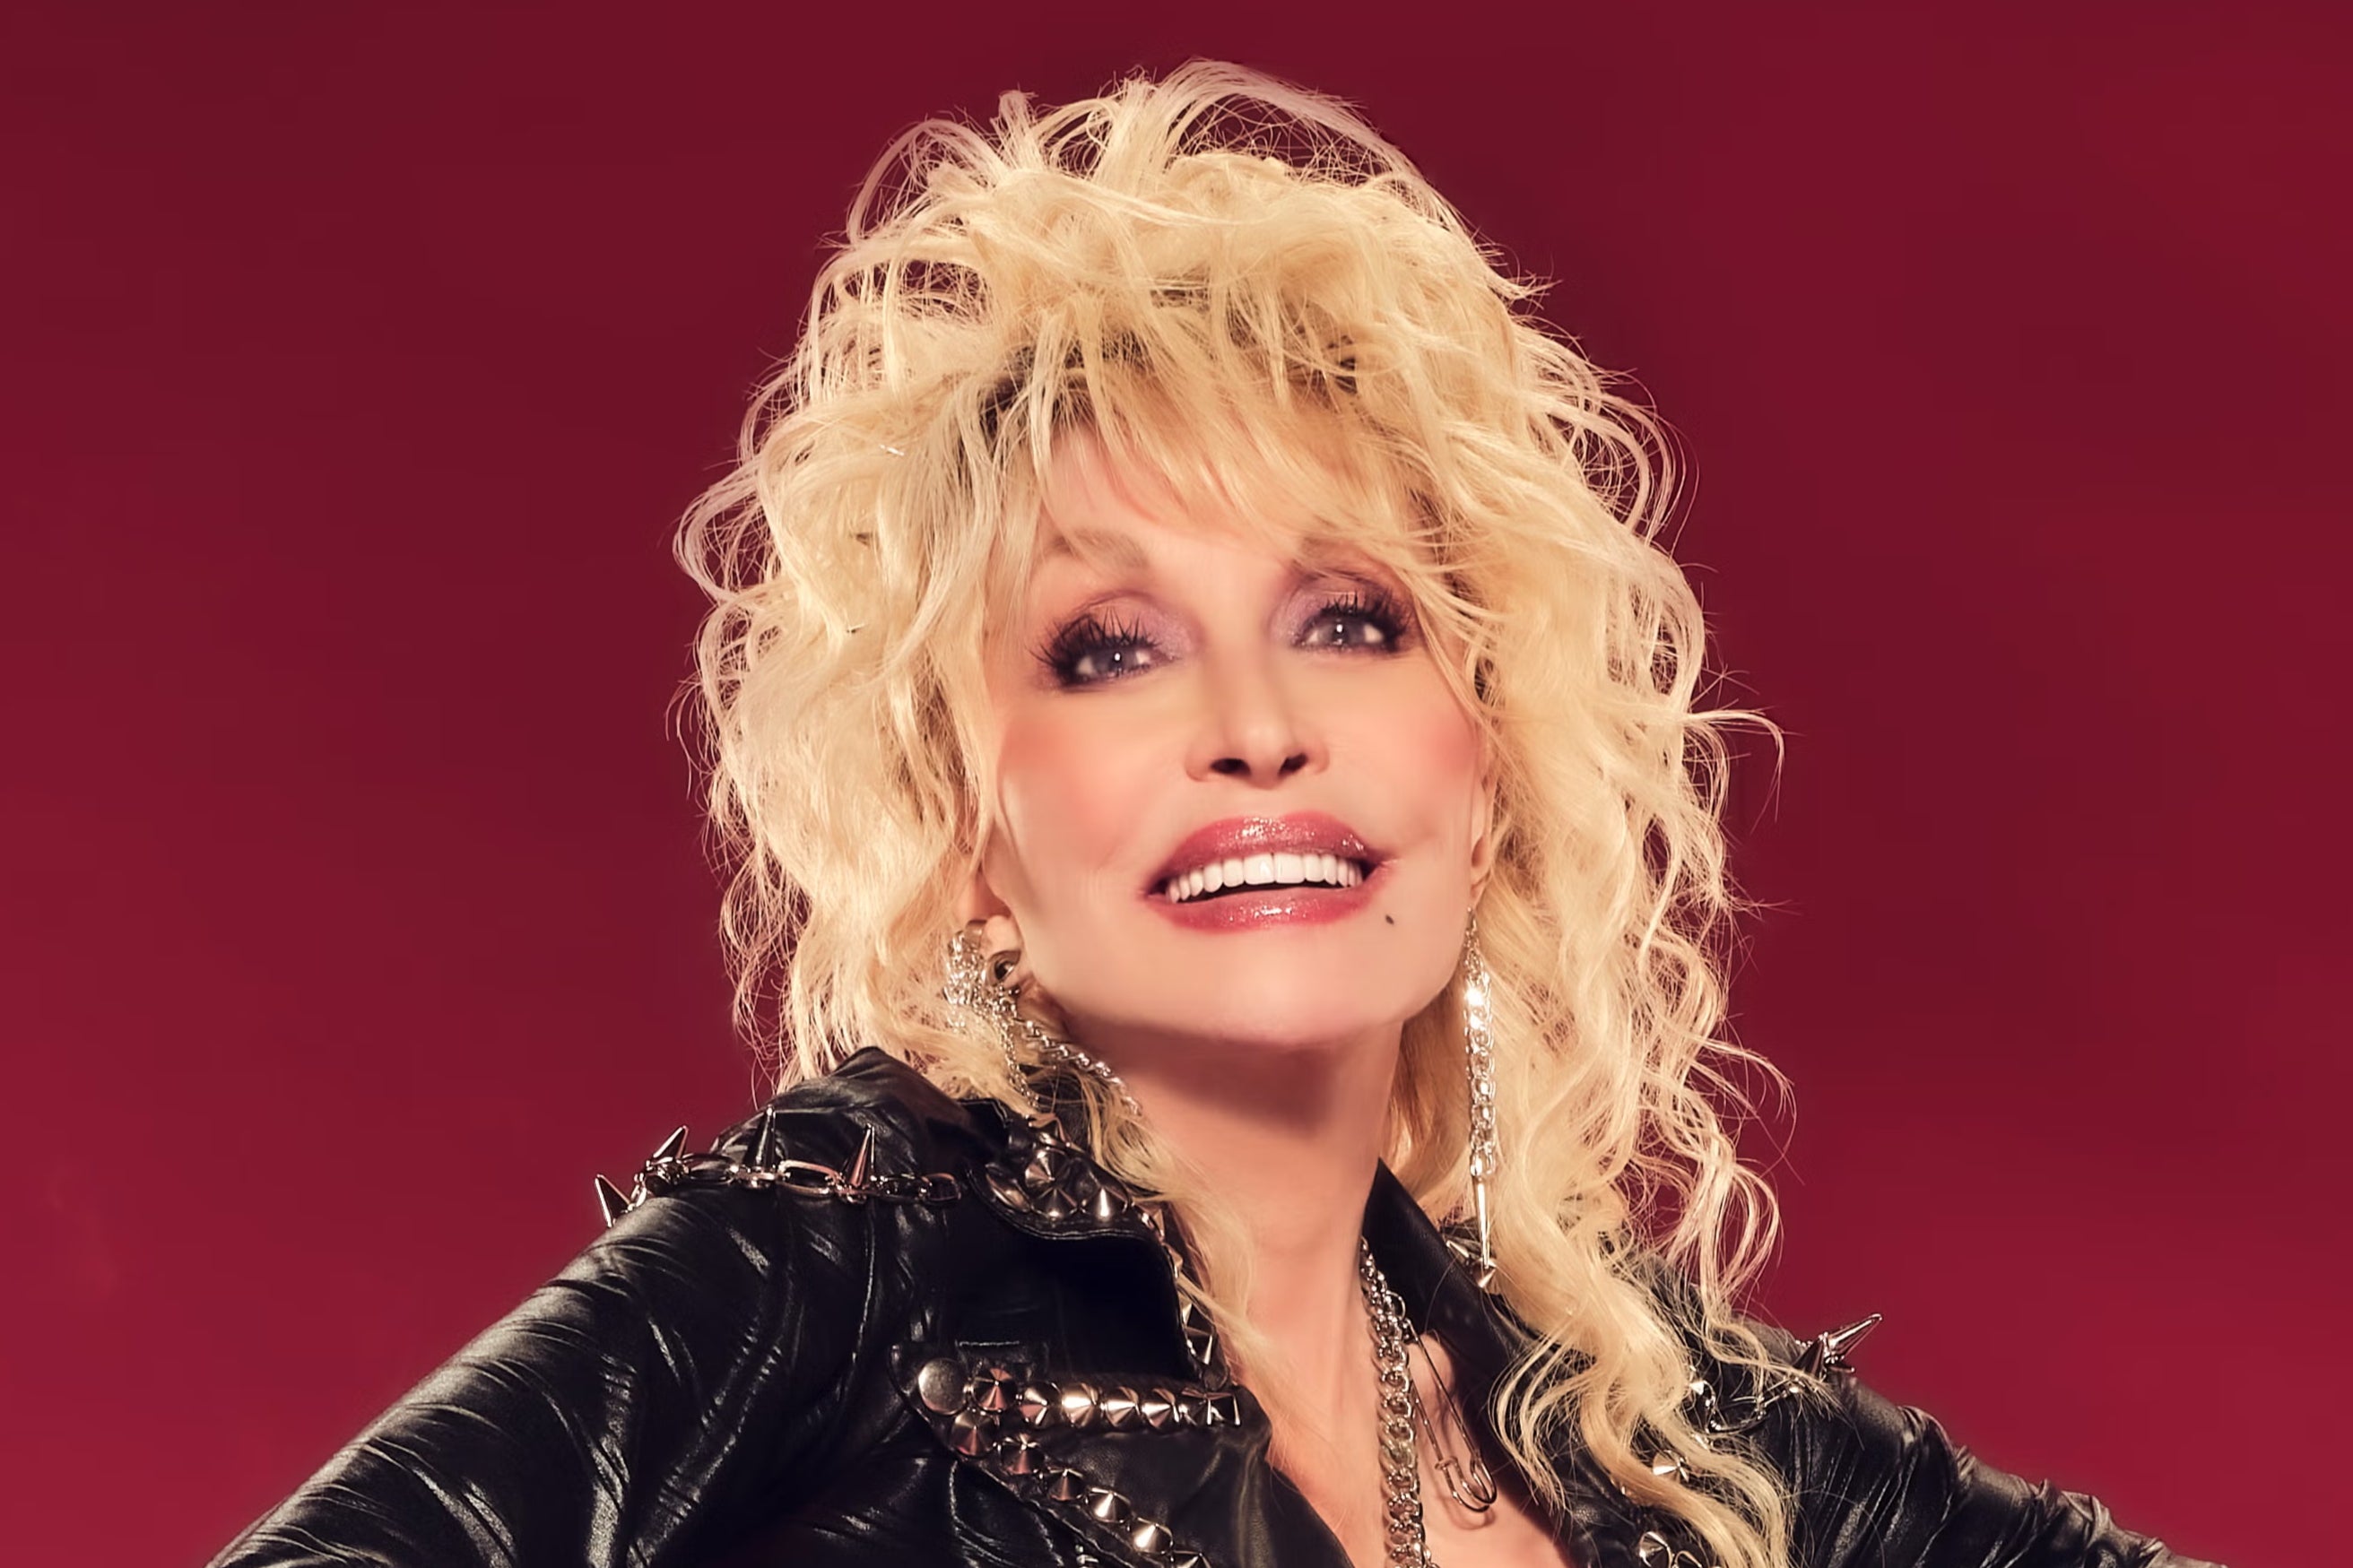 Dolly Parton on family, fashion and rock stardom: 'I have to be